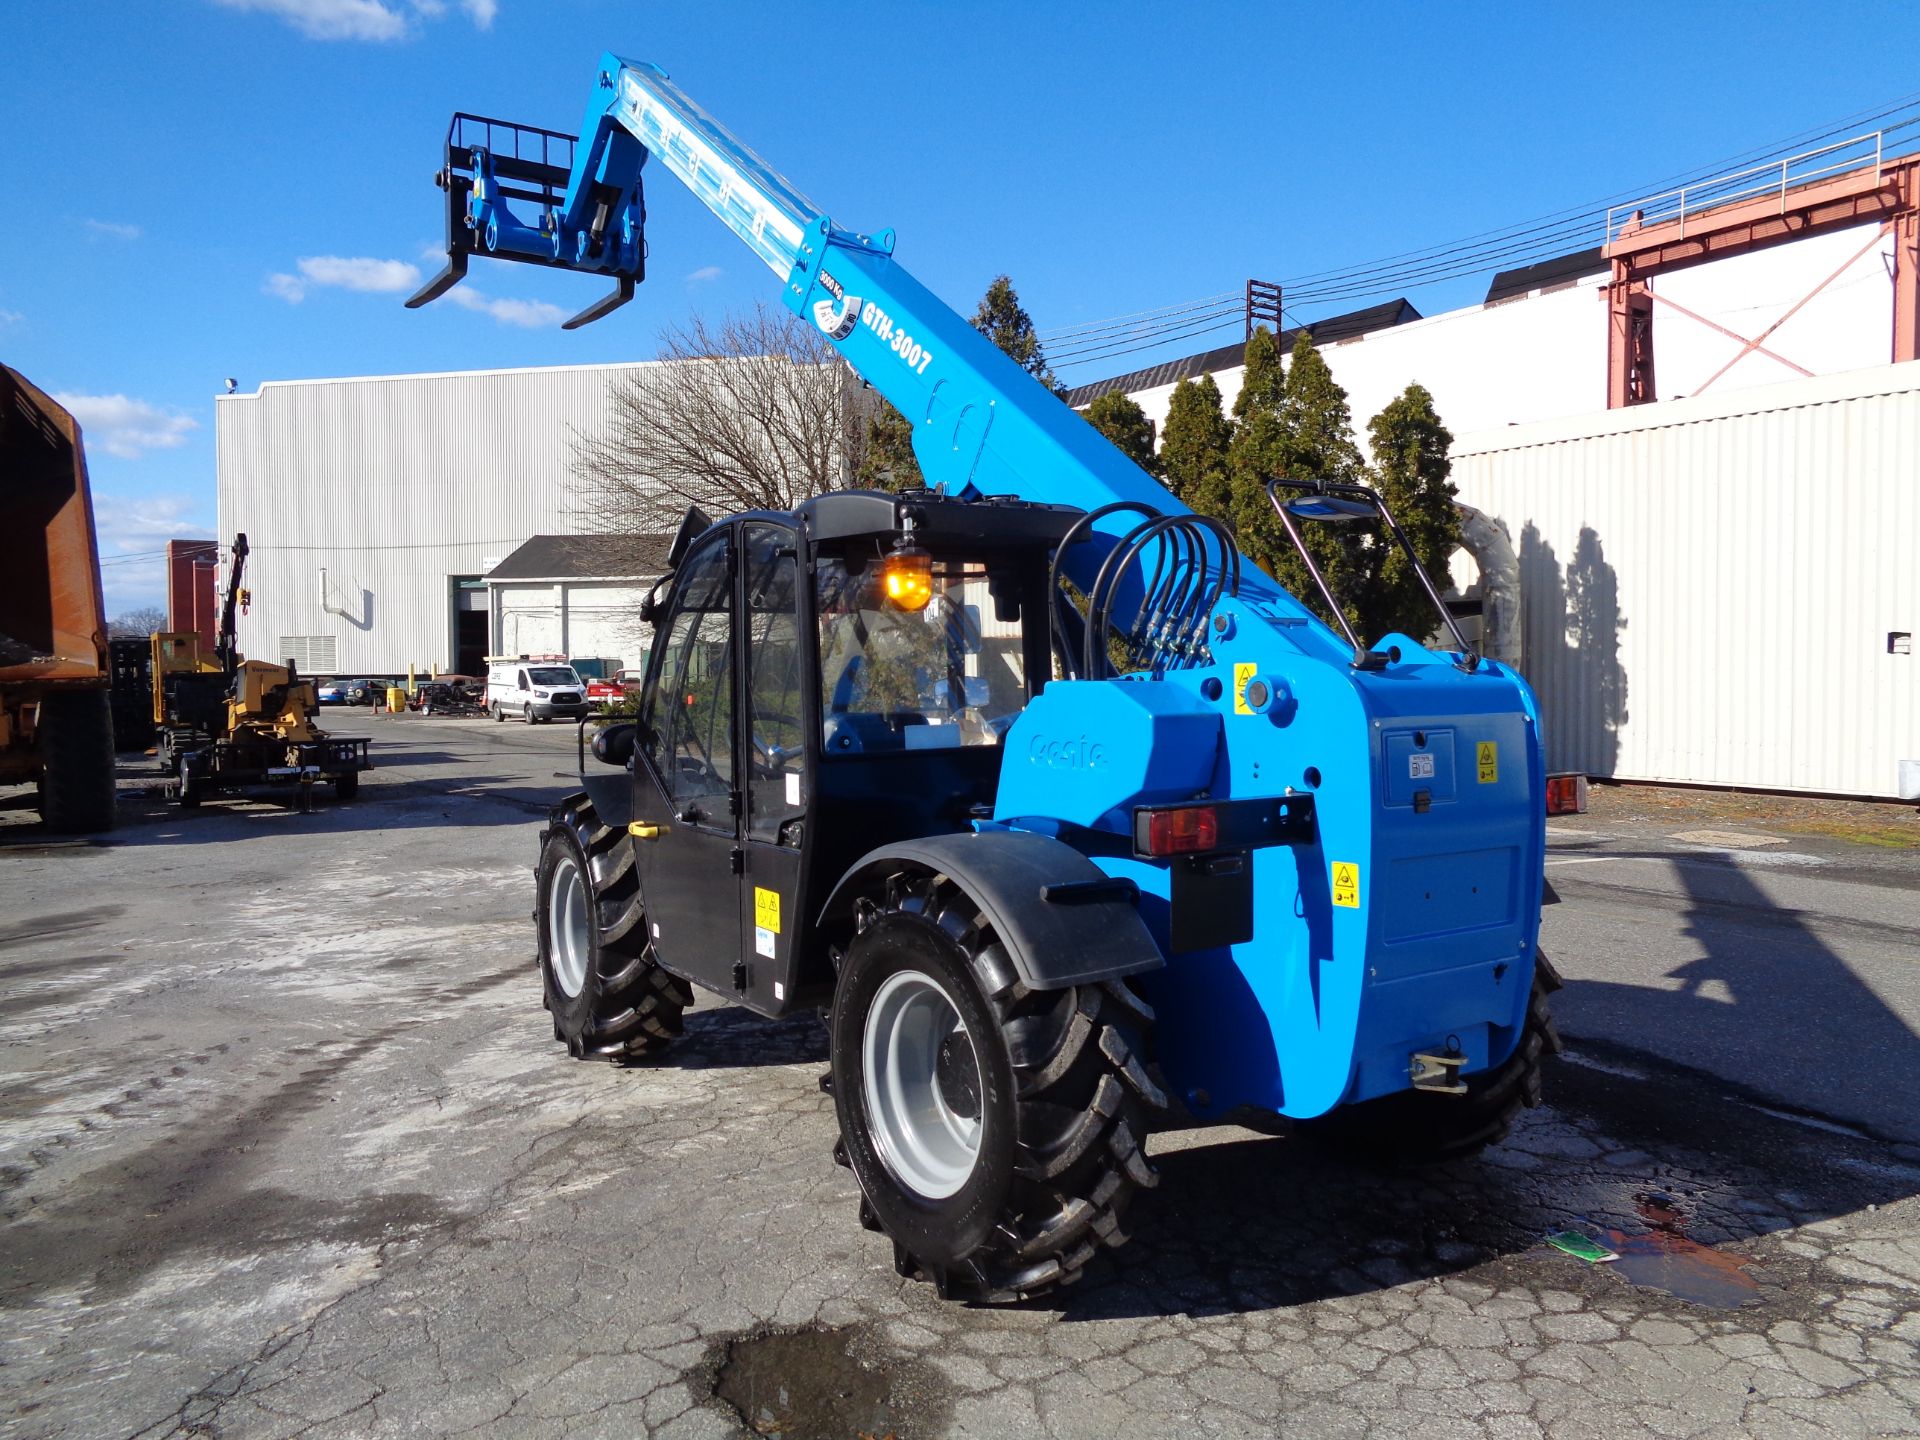 New Unused 2018 Genie GTH3007 Telescopic Forklift 6,600 lbs - Enclosed Cab - Image 11 of 23